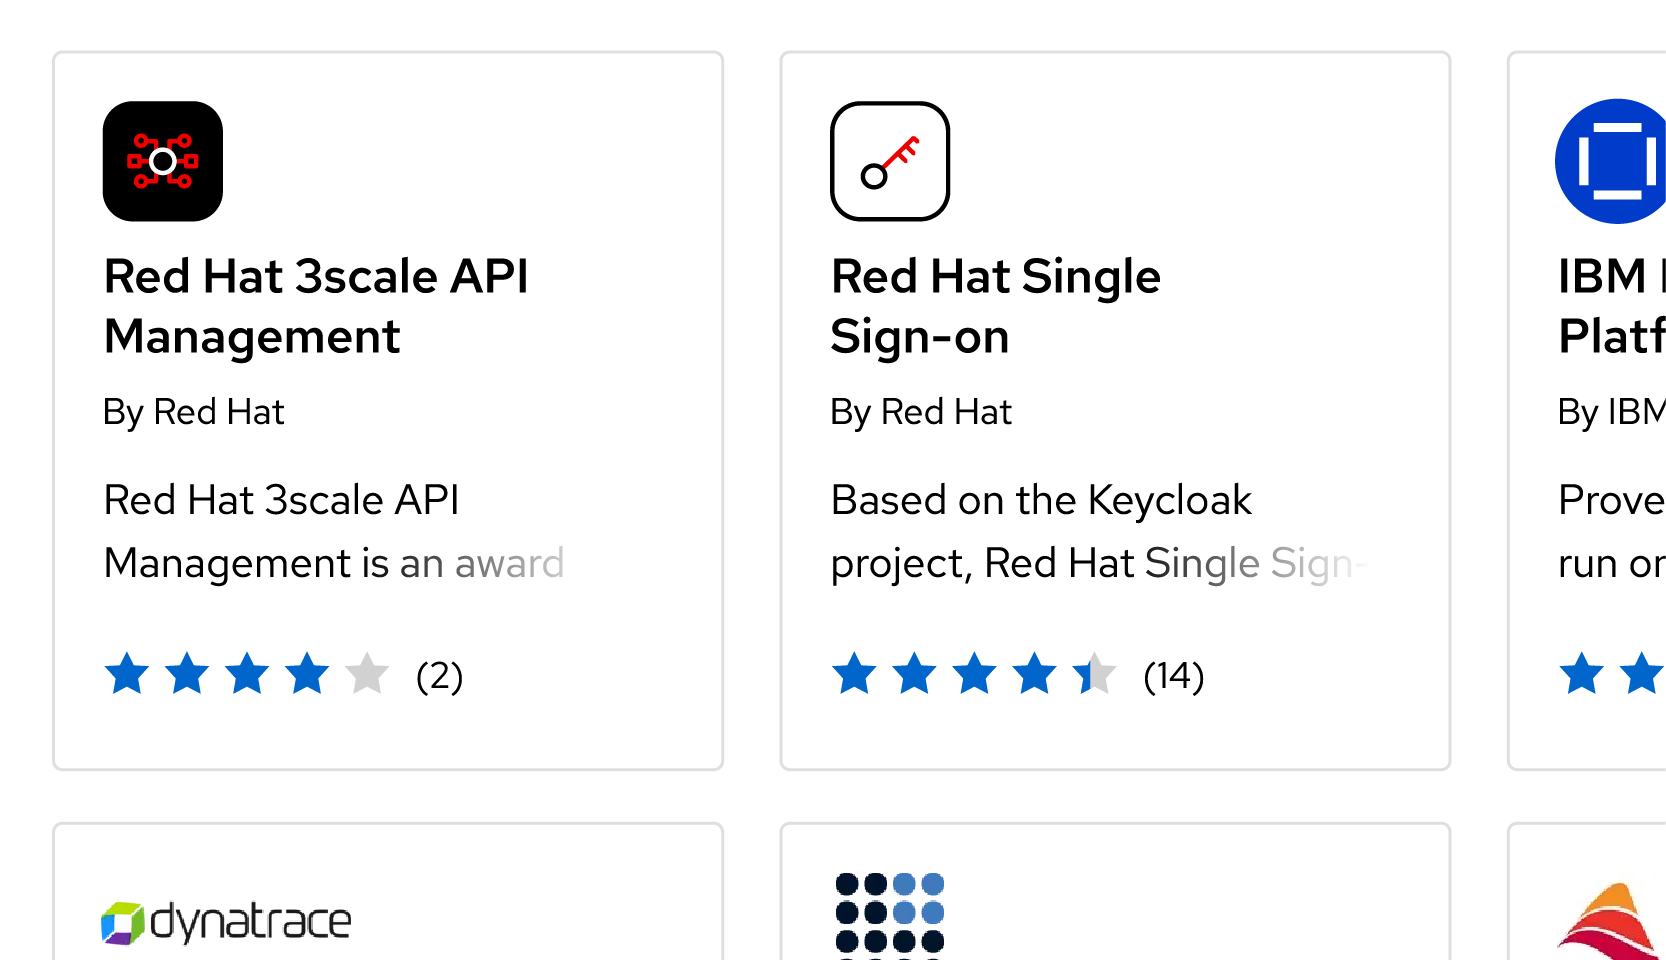 Screenshot of two Red Hat product icons in a marketplace with their full product name typed underneath.